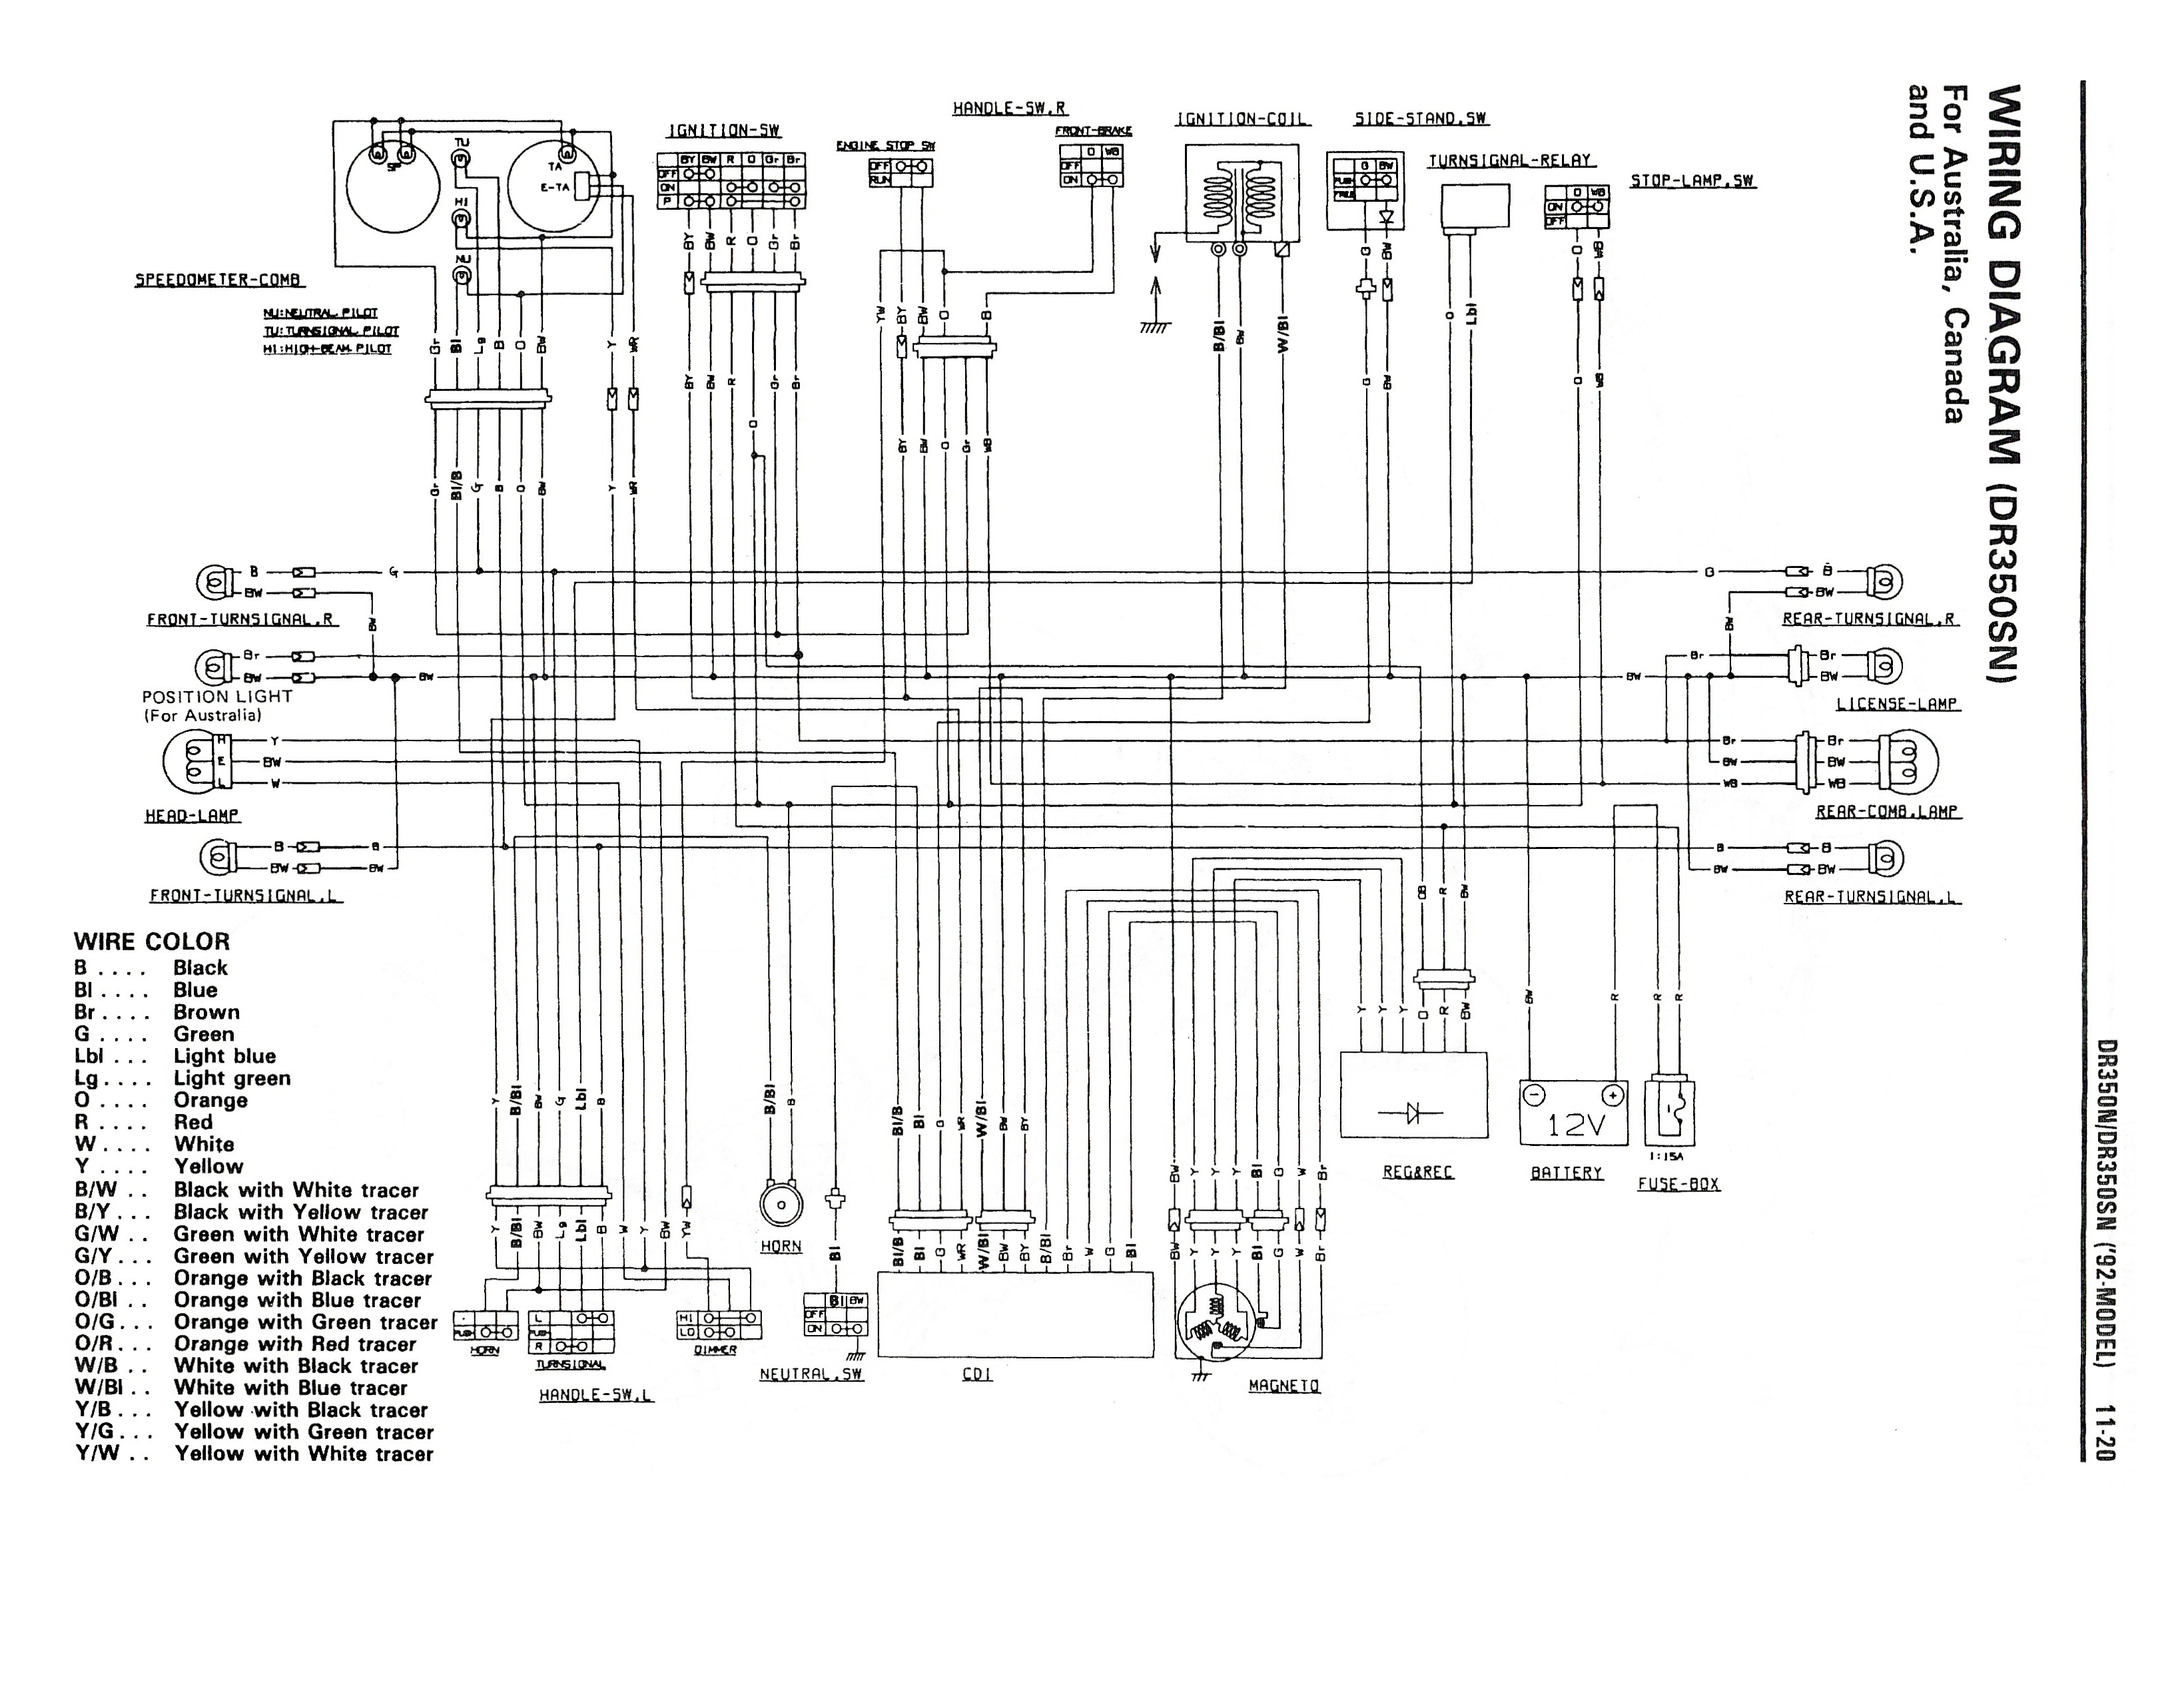 Wiring diagram for the DR350 S (1992 and later models - Australia, Canada, USA)